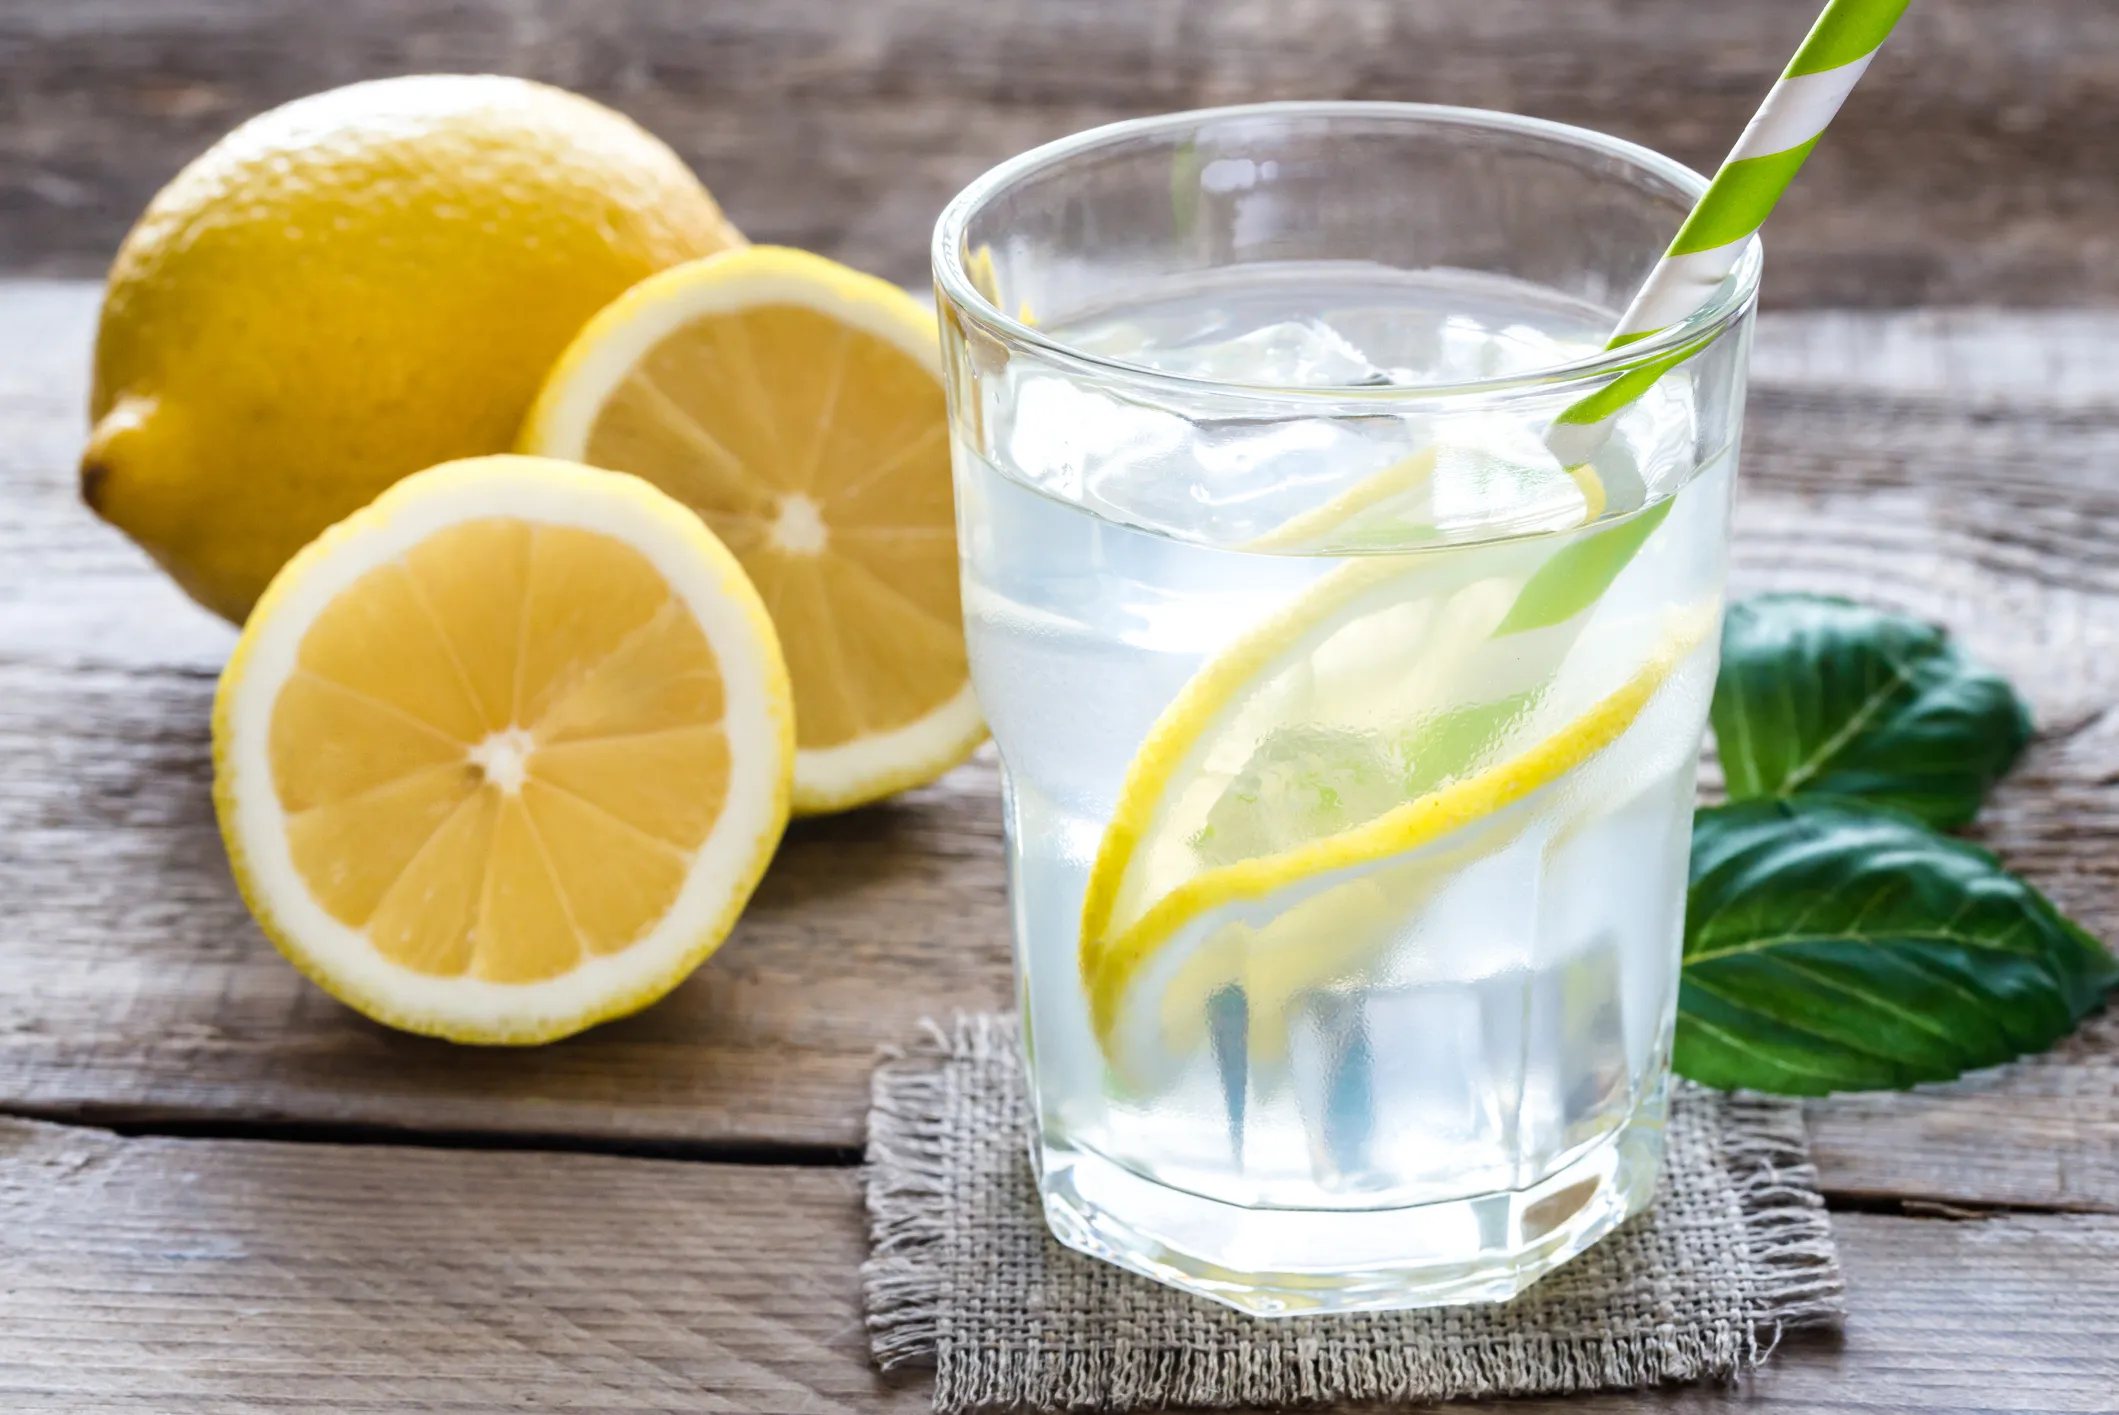 Lemon Water Lose Weight Does Lemonade Really Lose Weight Learn the truth here